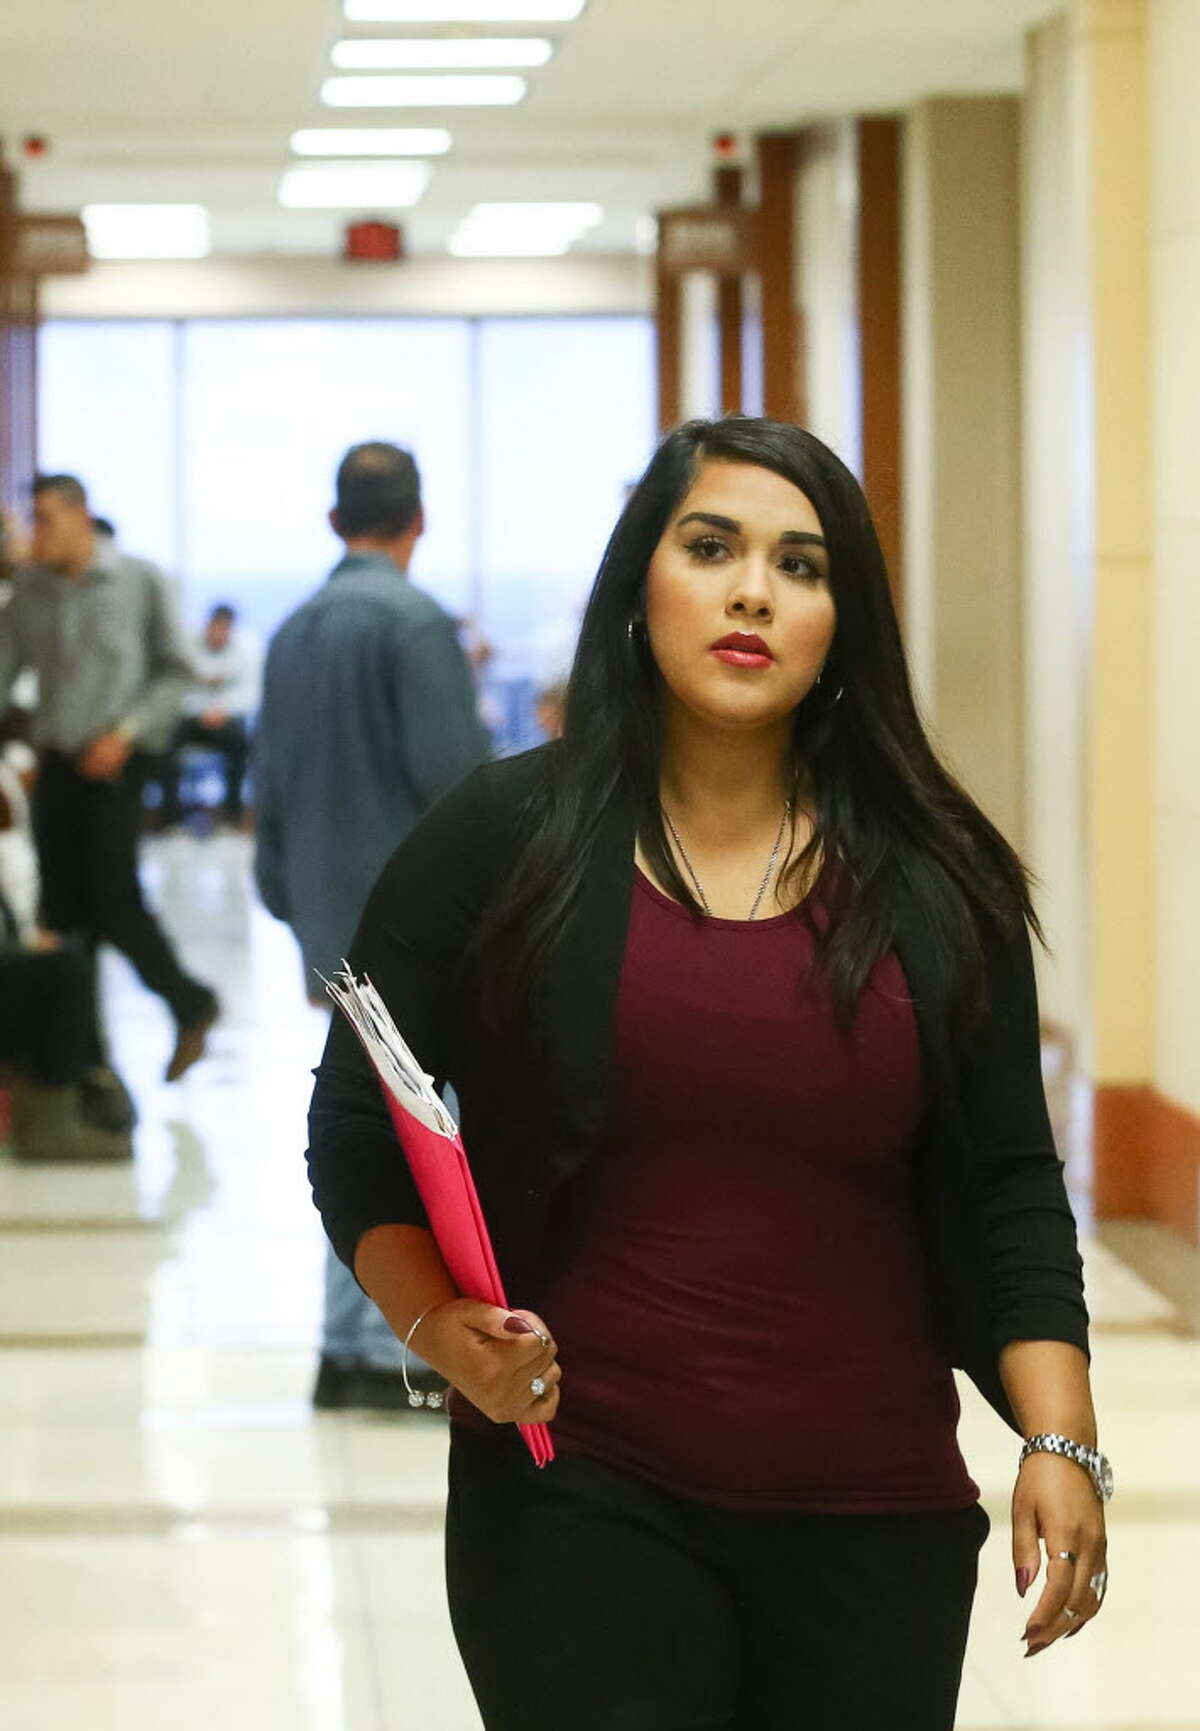 Alexandria Vera, 25, a former Aldine ISD teacher accused of having a sexual relationship with a student, walks into court Wednesday, Nov. 9, 2016, in Houston.